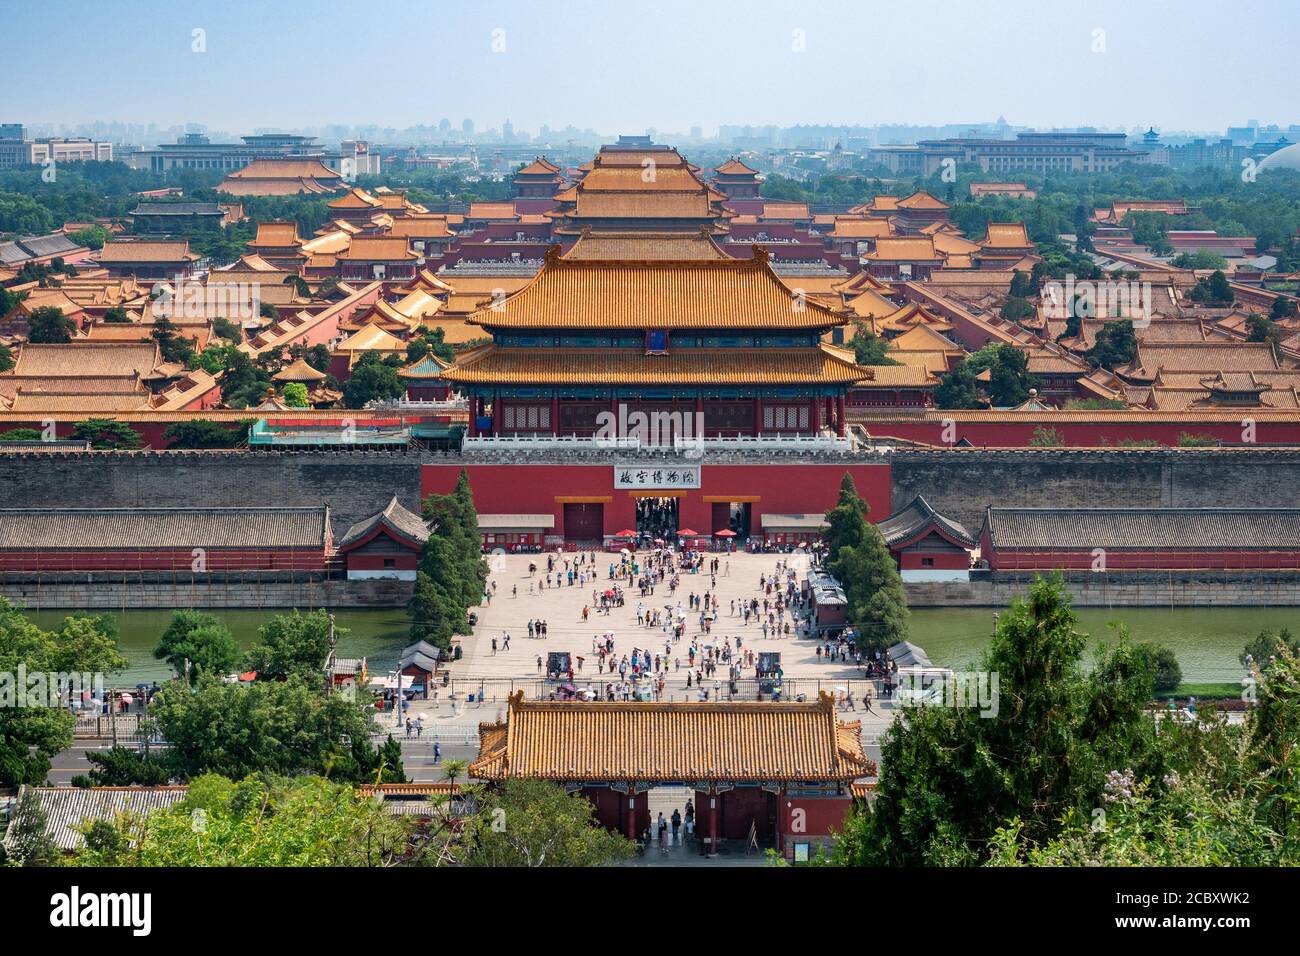 Beijing, China, people at the gates of the ancient Forbidden City palace complex during summer. Translation of Chinese characters: the palace museum. Stock Photo